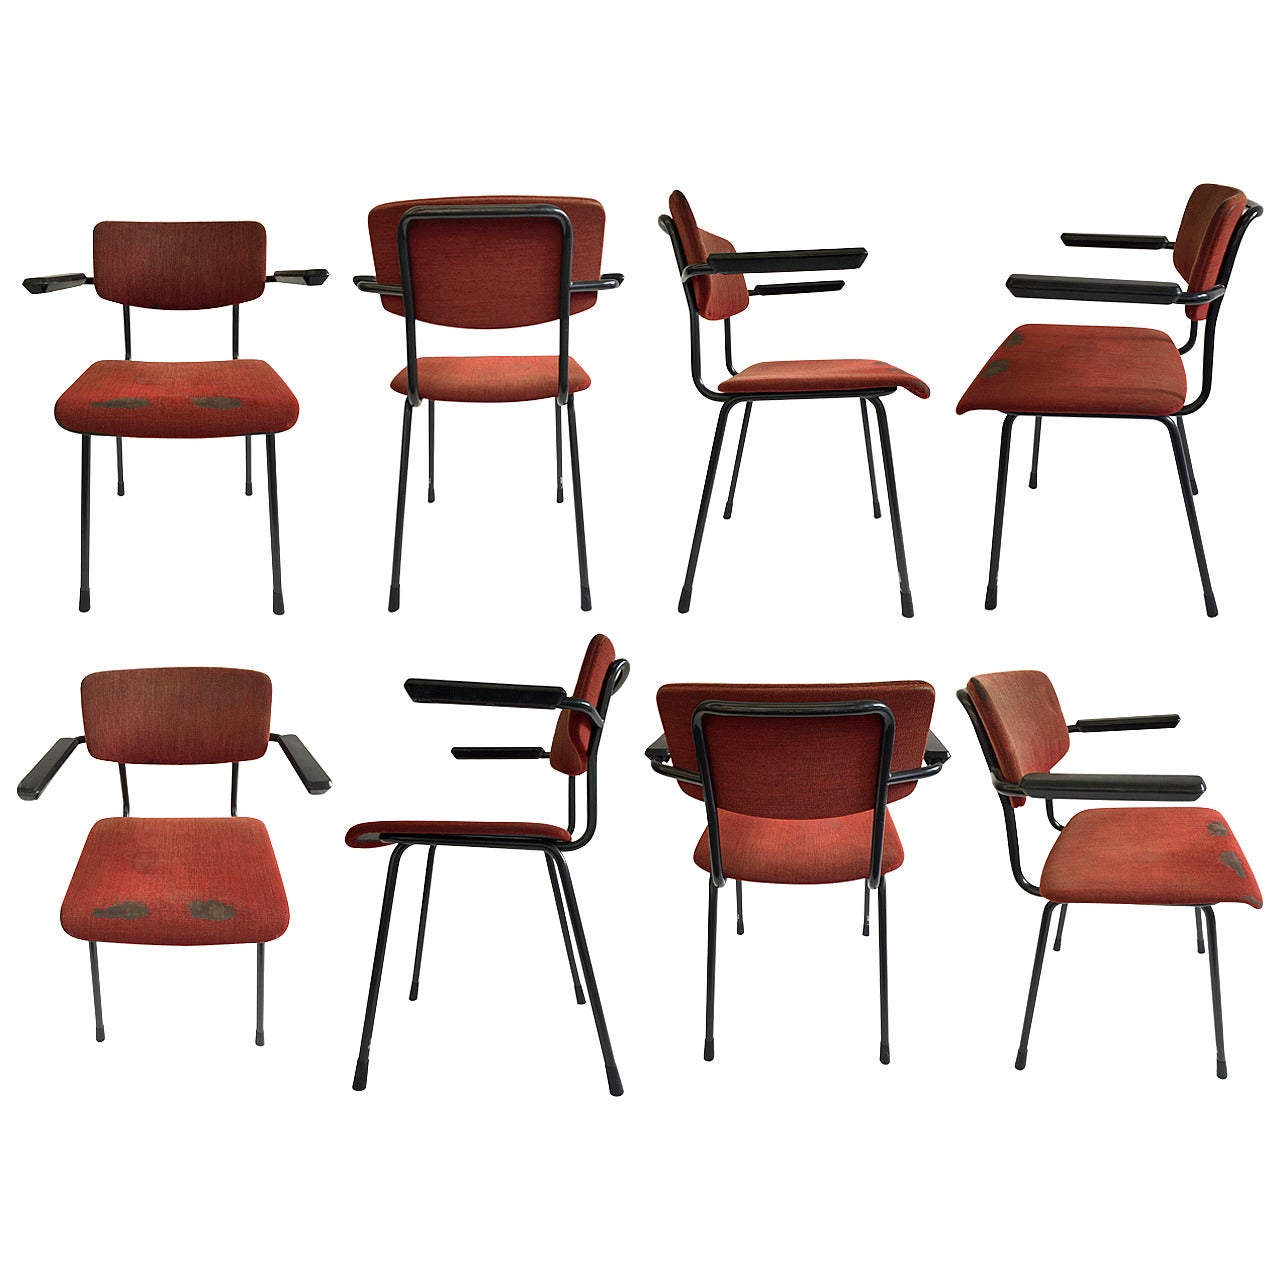 Big Lot Gispen 1236 Armchairs Produced in 1960 for a Dutch University